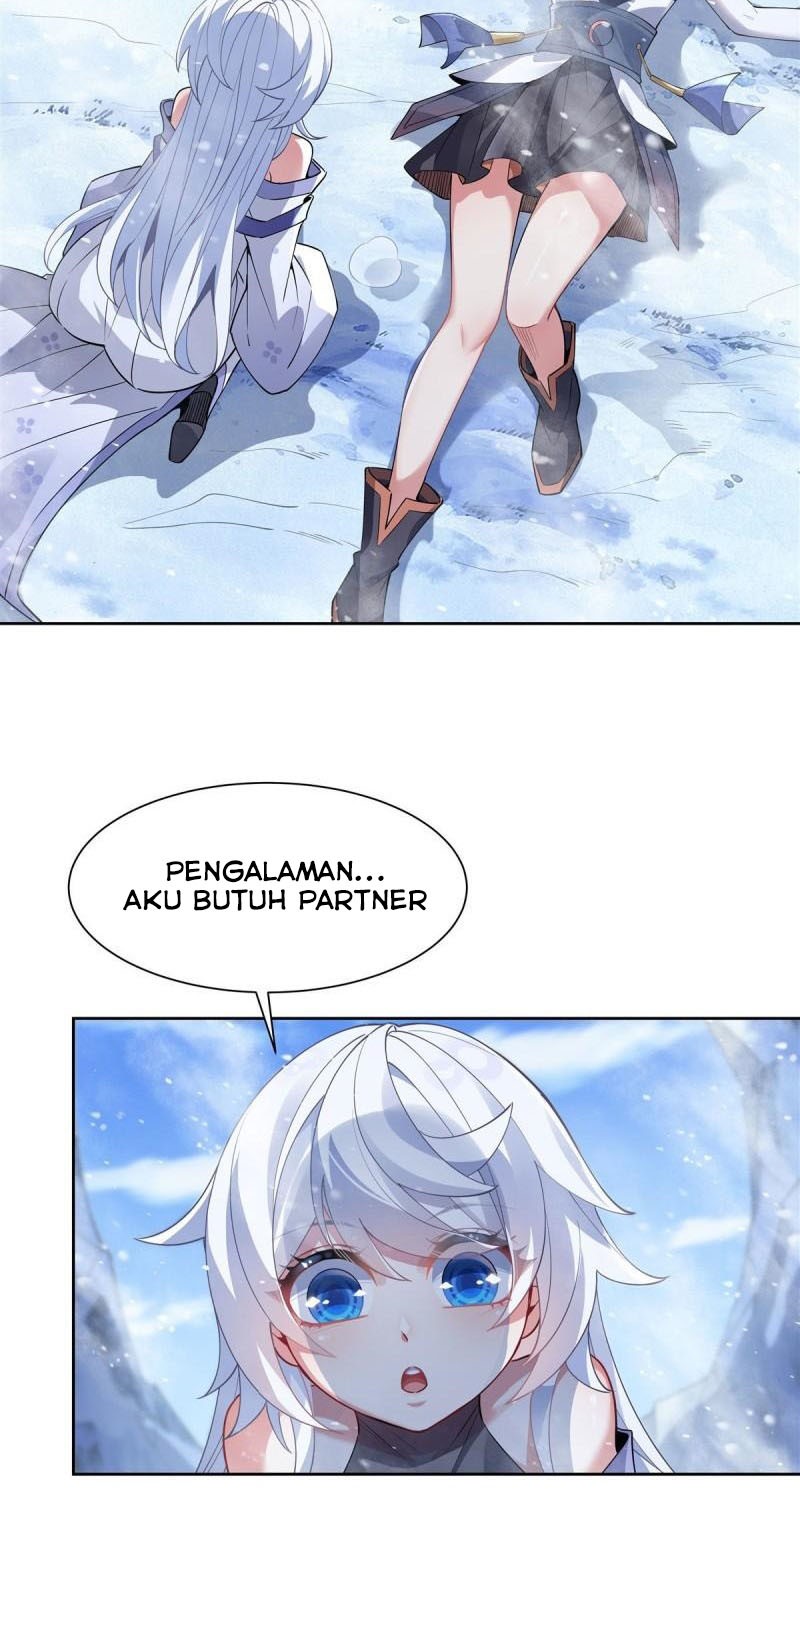 Dilarang COPAS - situs resmi www.mangacanblog.com - Komik my female apprentices are all big shots from the future 046 - chapter 46 47 Indonesia my female apprentices are all big shots from the future 046 - chapter 46 Terbaru 12|Baca Manga Komik Indonesia|Mangacan